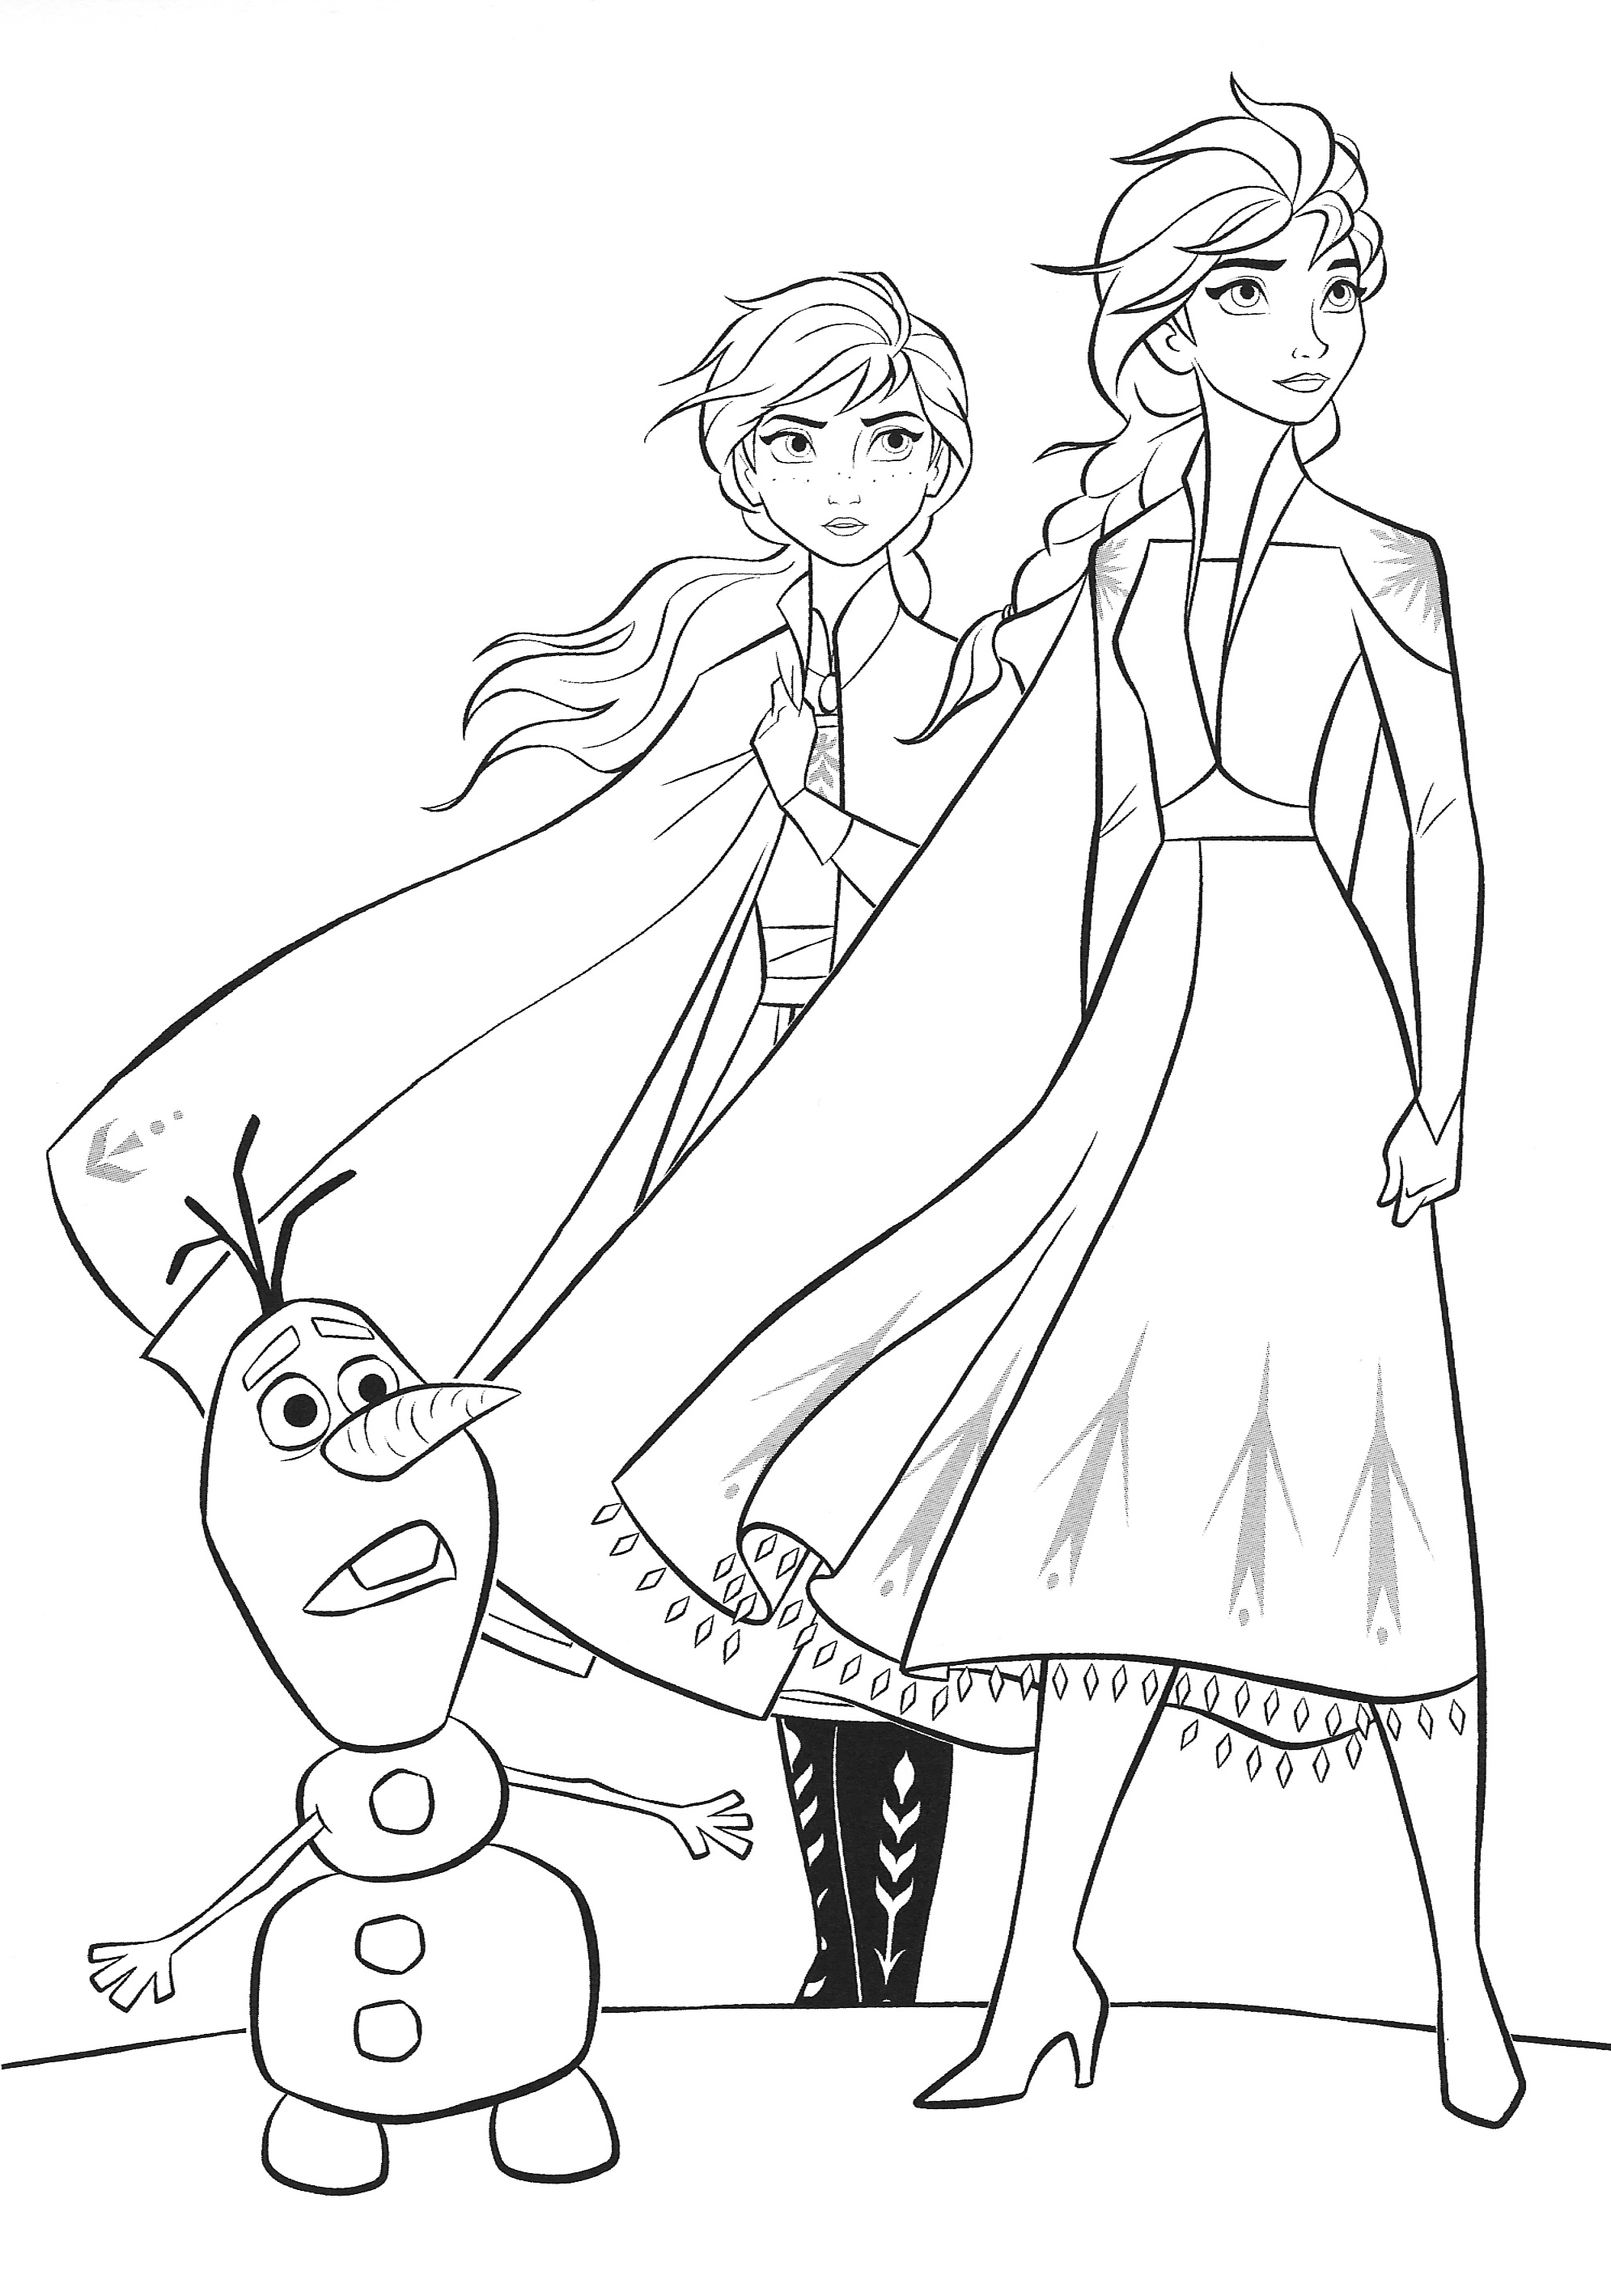 Frozen 20 Elsa and Anna coloring pages   YouLoveIt.com